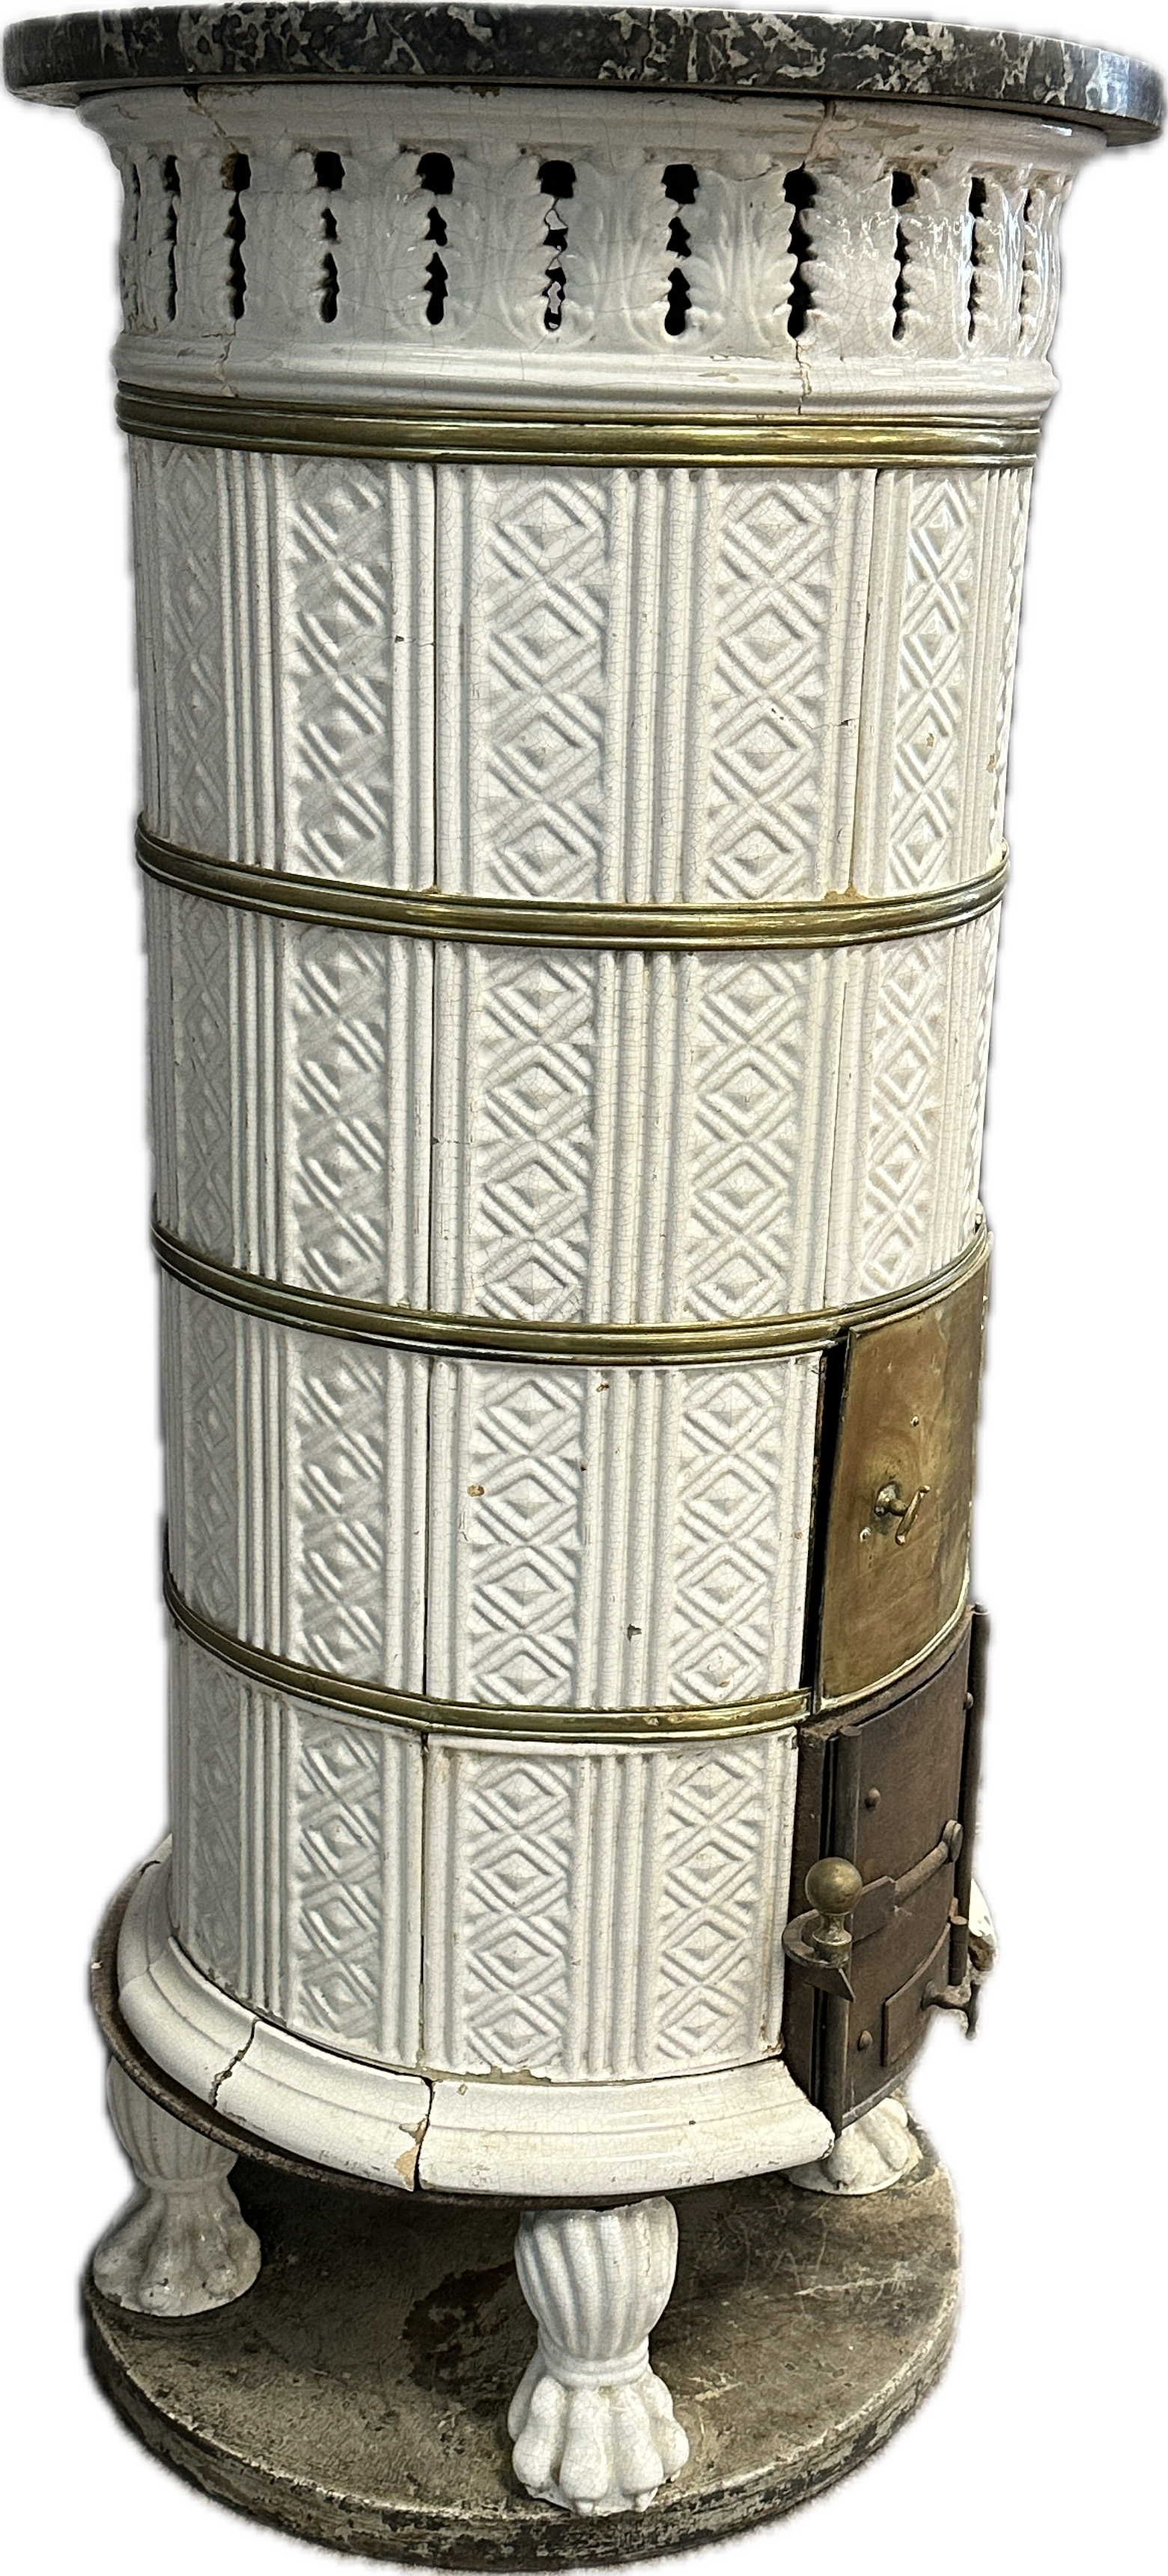 White Biedermeier round stove with tiles in relief structure. - Image 2 of 19